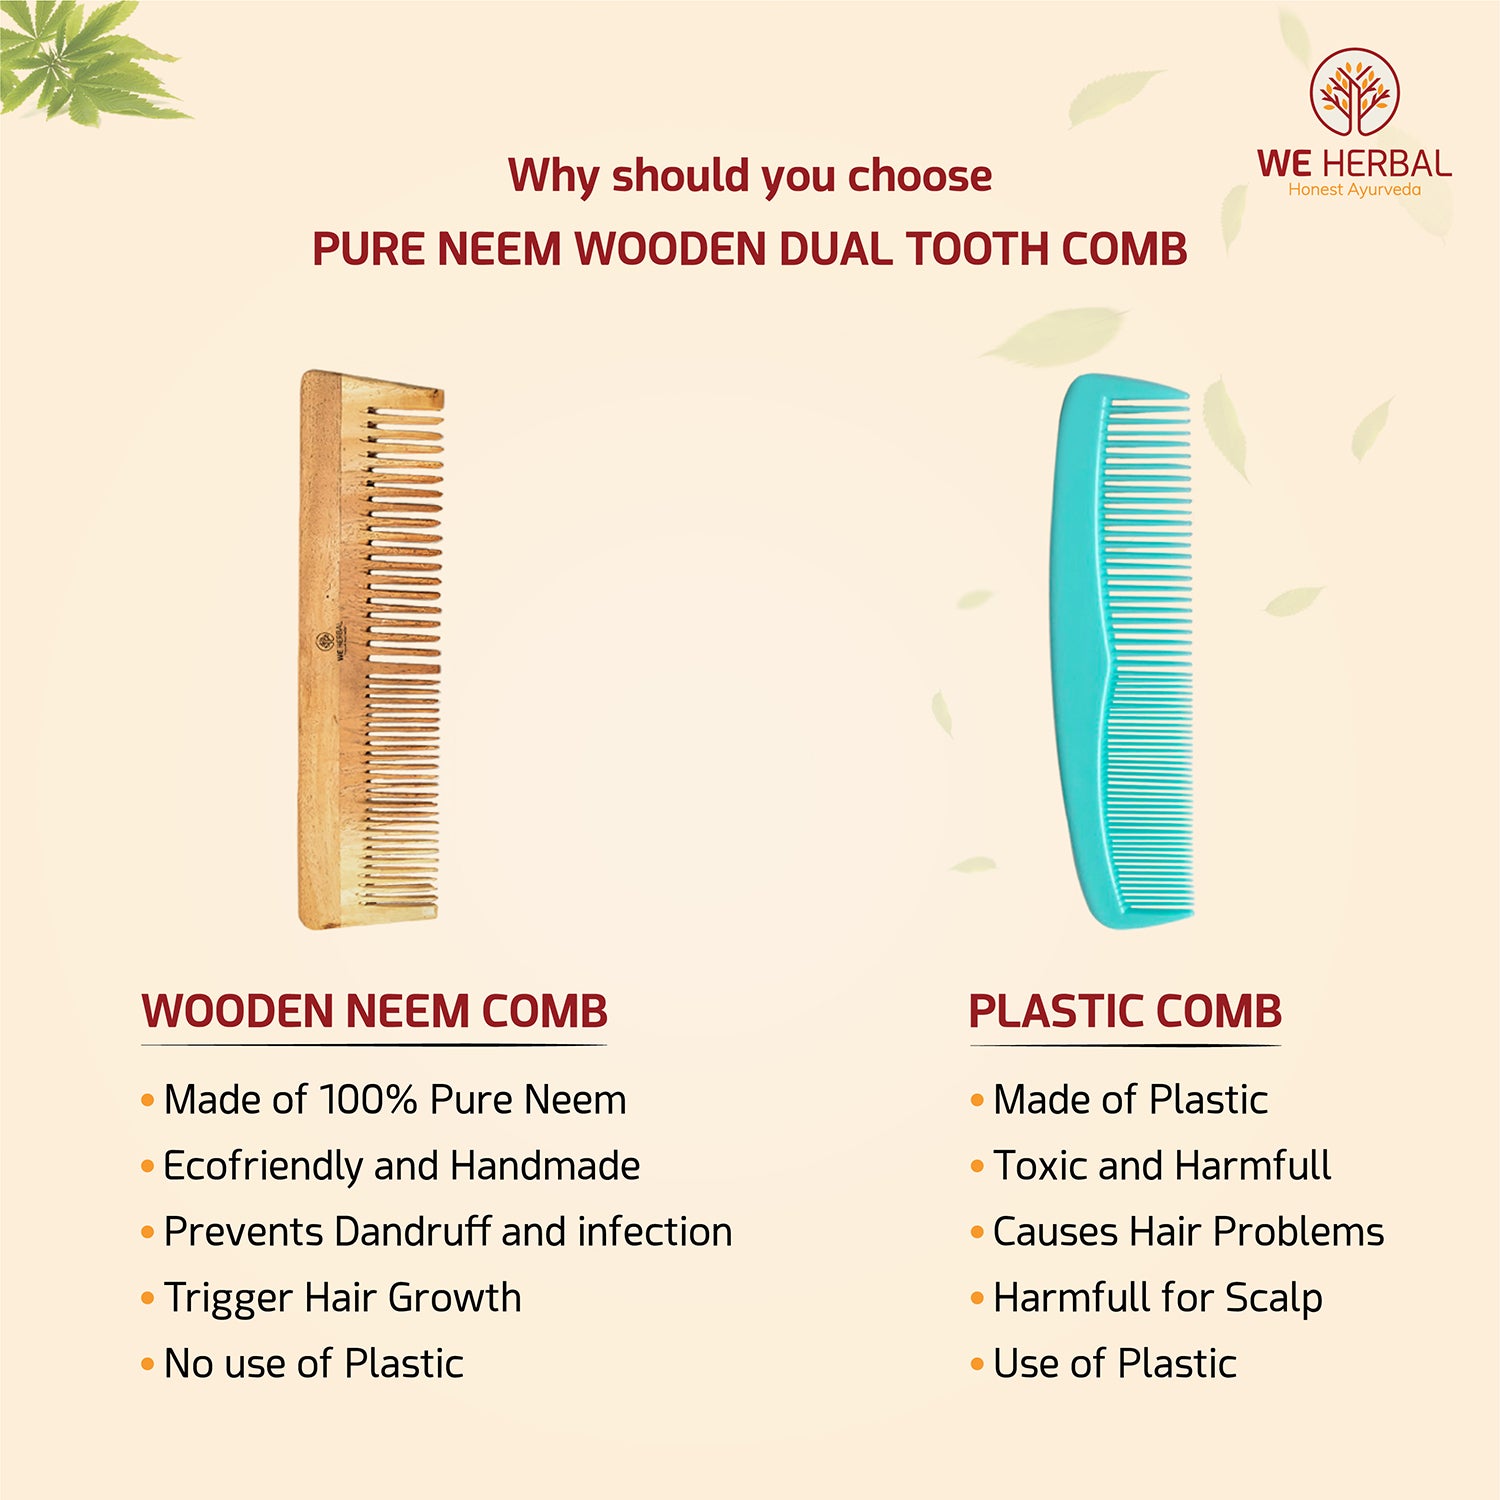 Pure Neem Wooden Dual Tooth Comb || Lily Comb We Herbal | Back to the Nature